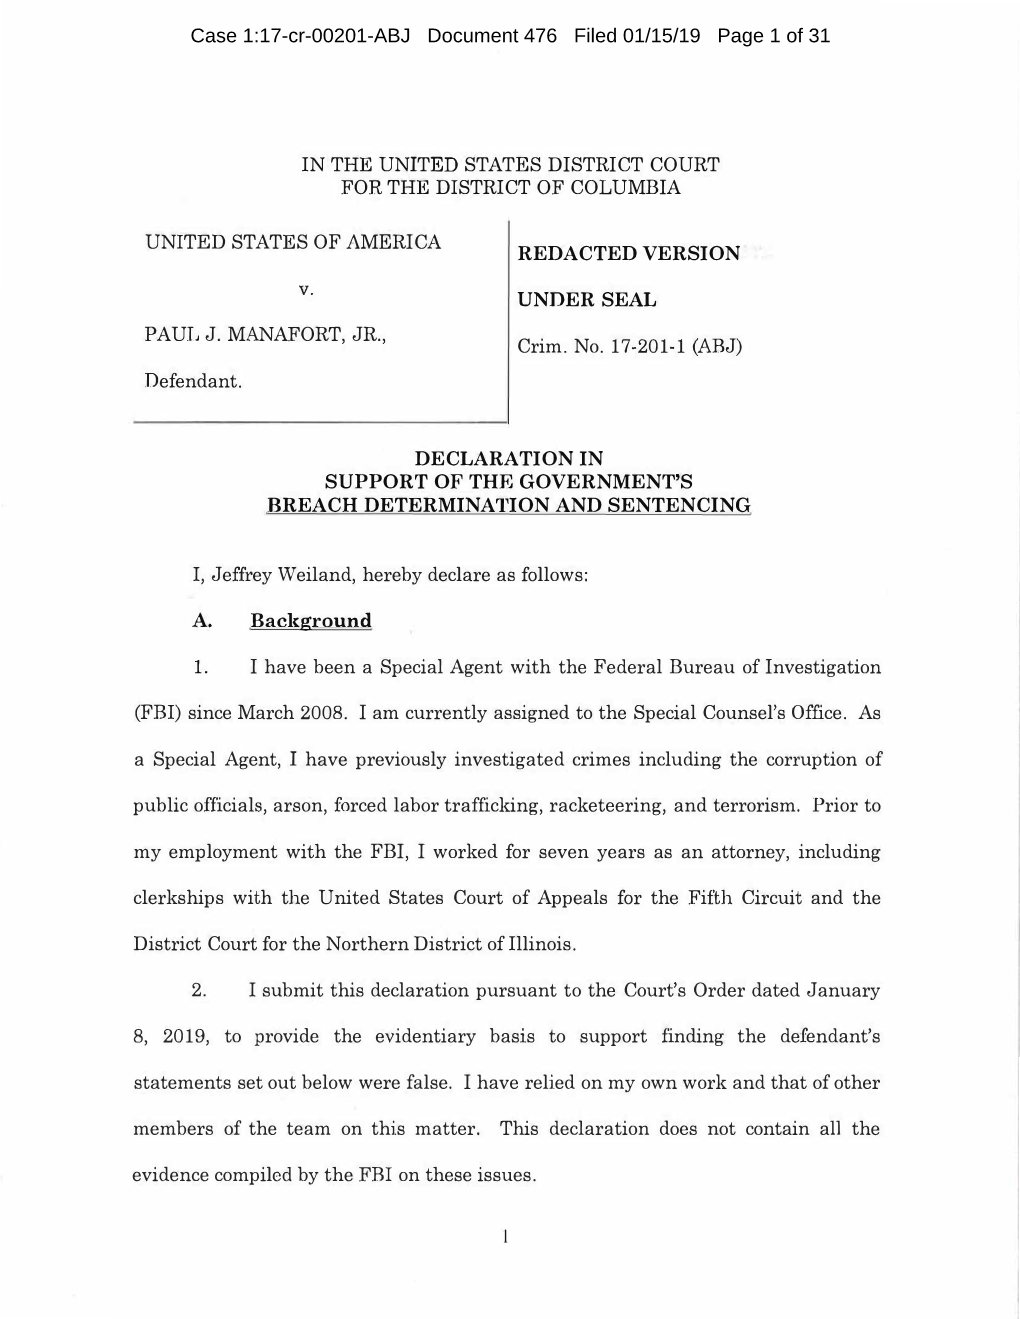 Redacted Version Under Seal Declaration in Support of the Government's Breach Determination and Sentencing